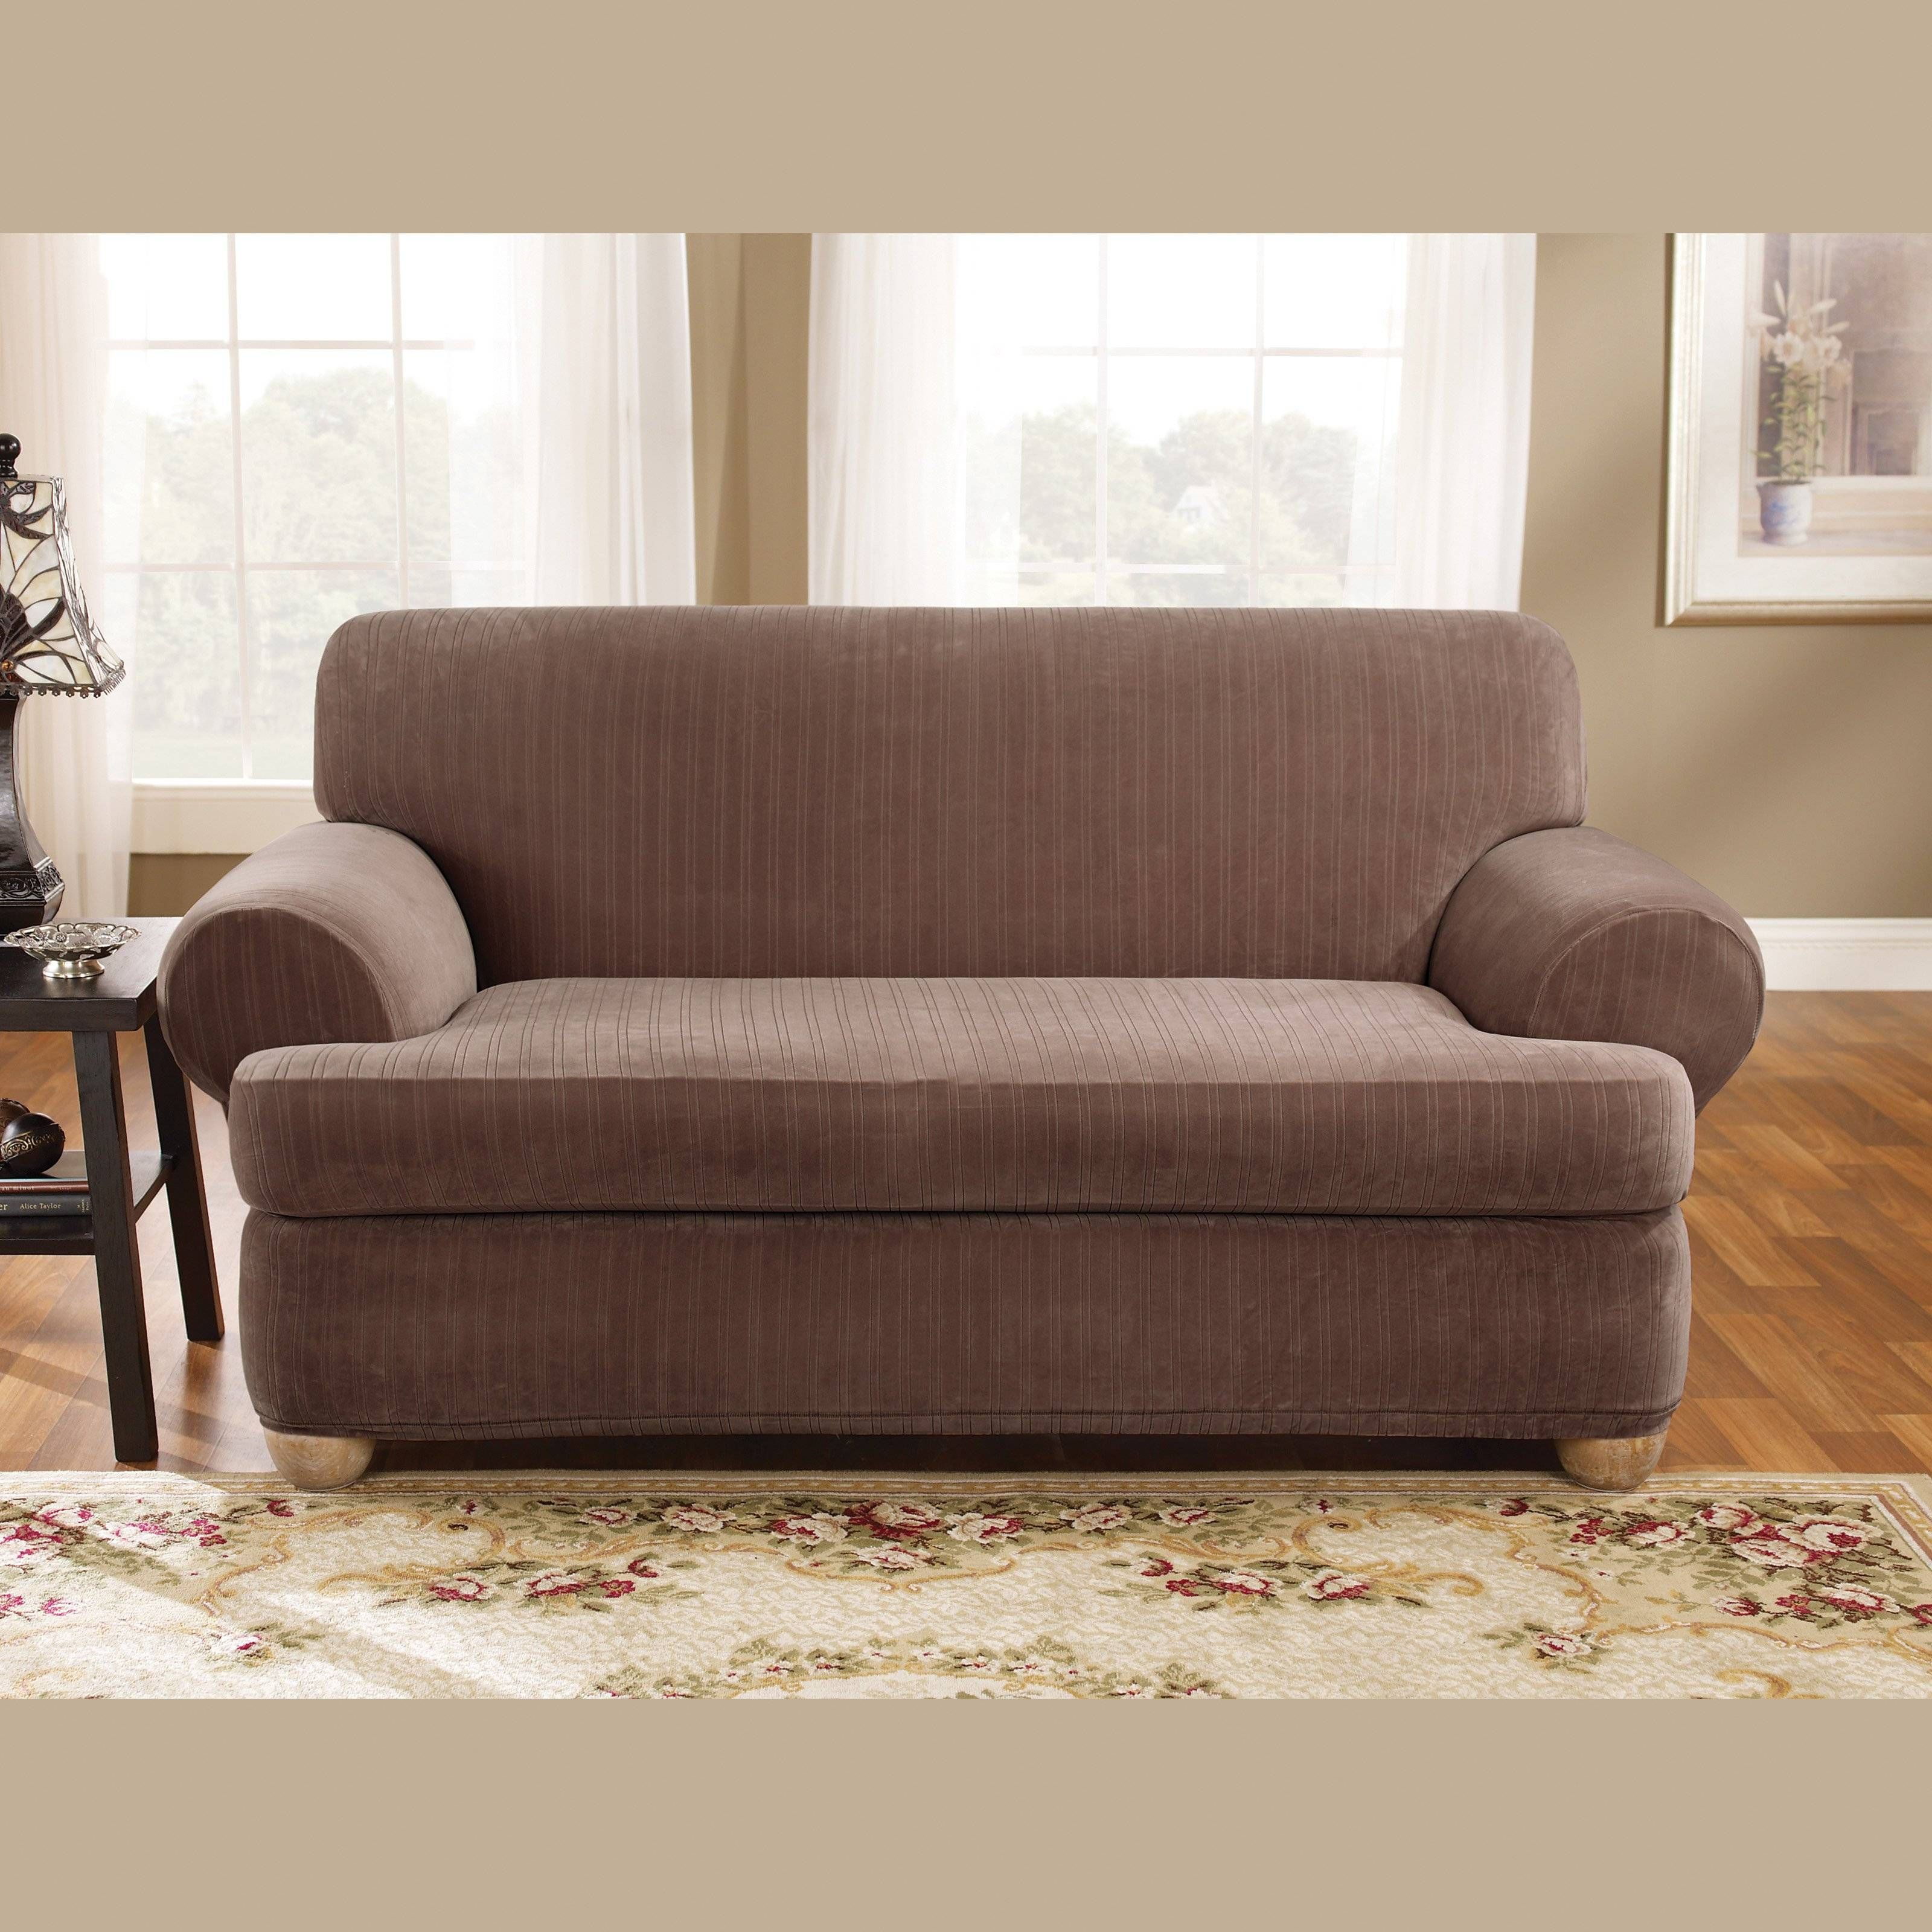 Sure Fit Stretch Pique T Cushion Two Piece Sofa Slipcover | Hayneedle Intended For 2 Piece Sofa Covers (View 6 of 30)